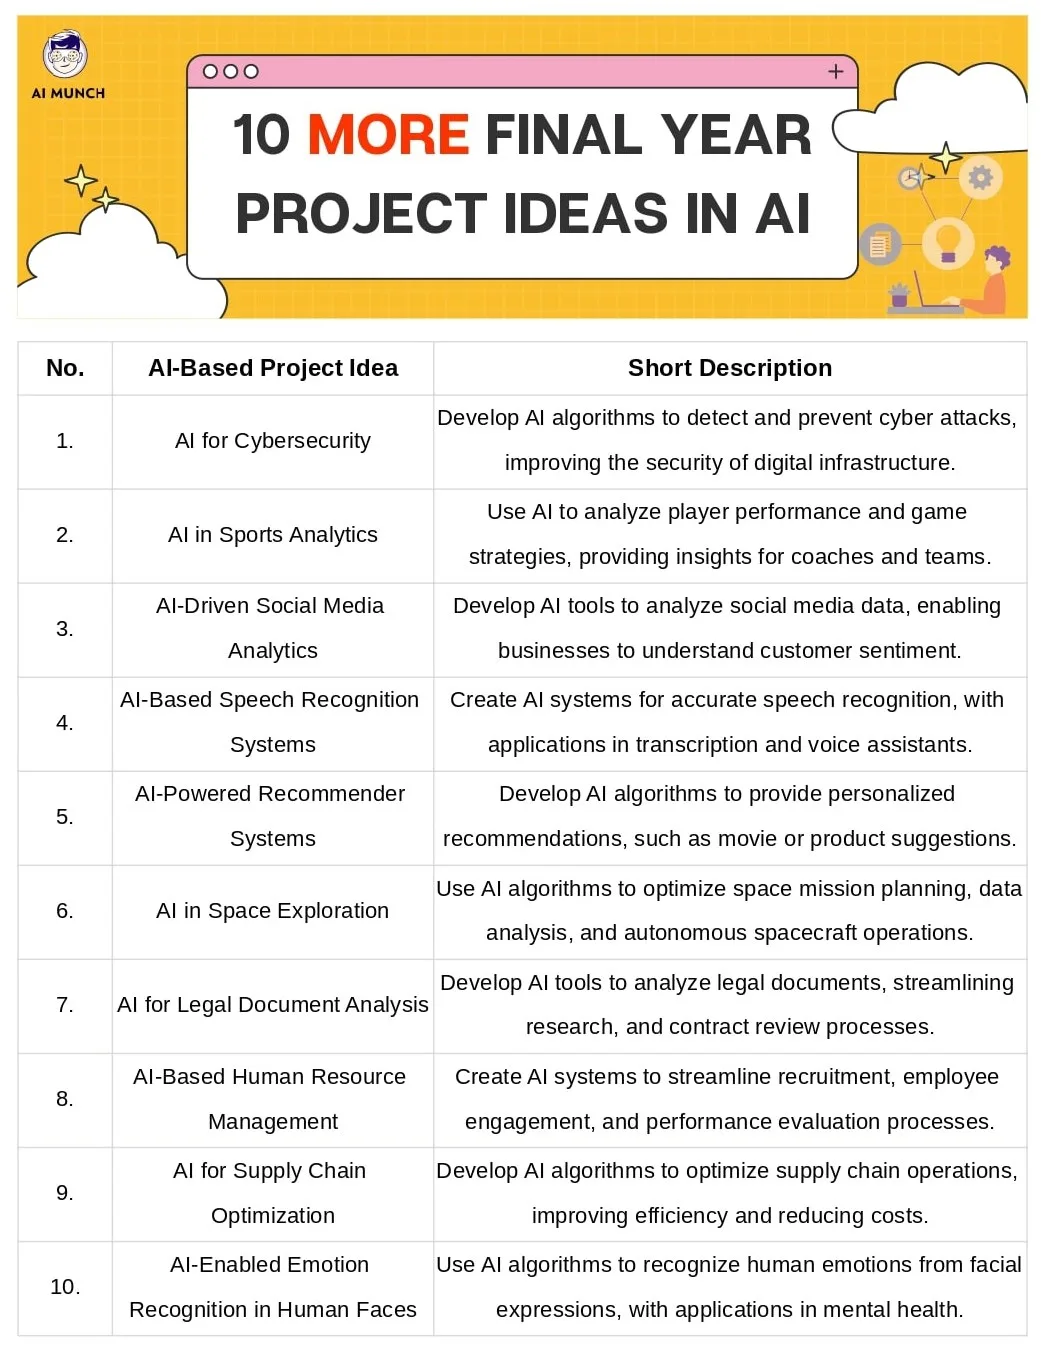 AI based projects idea for final year